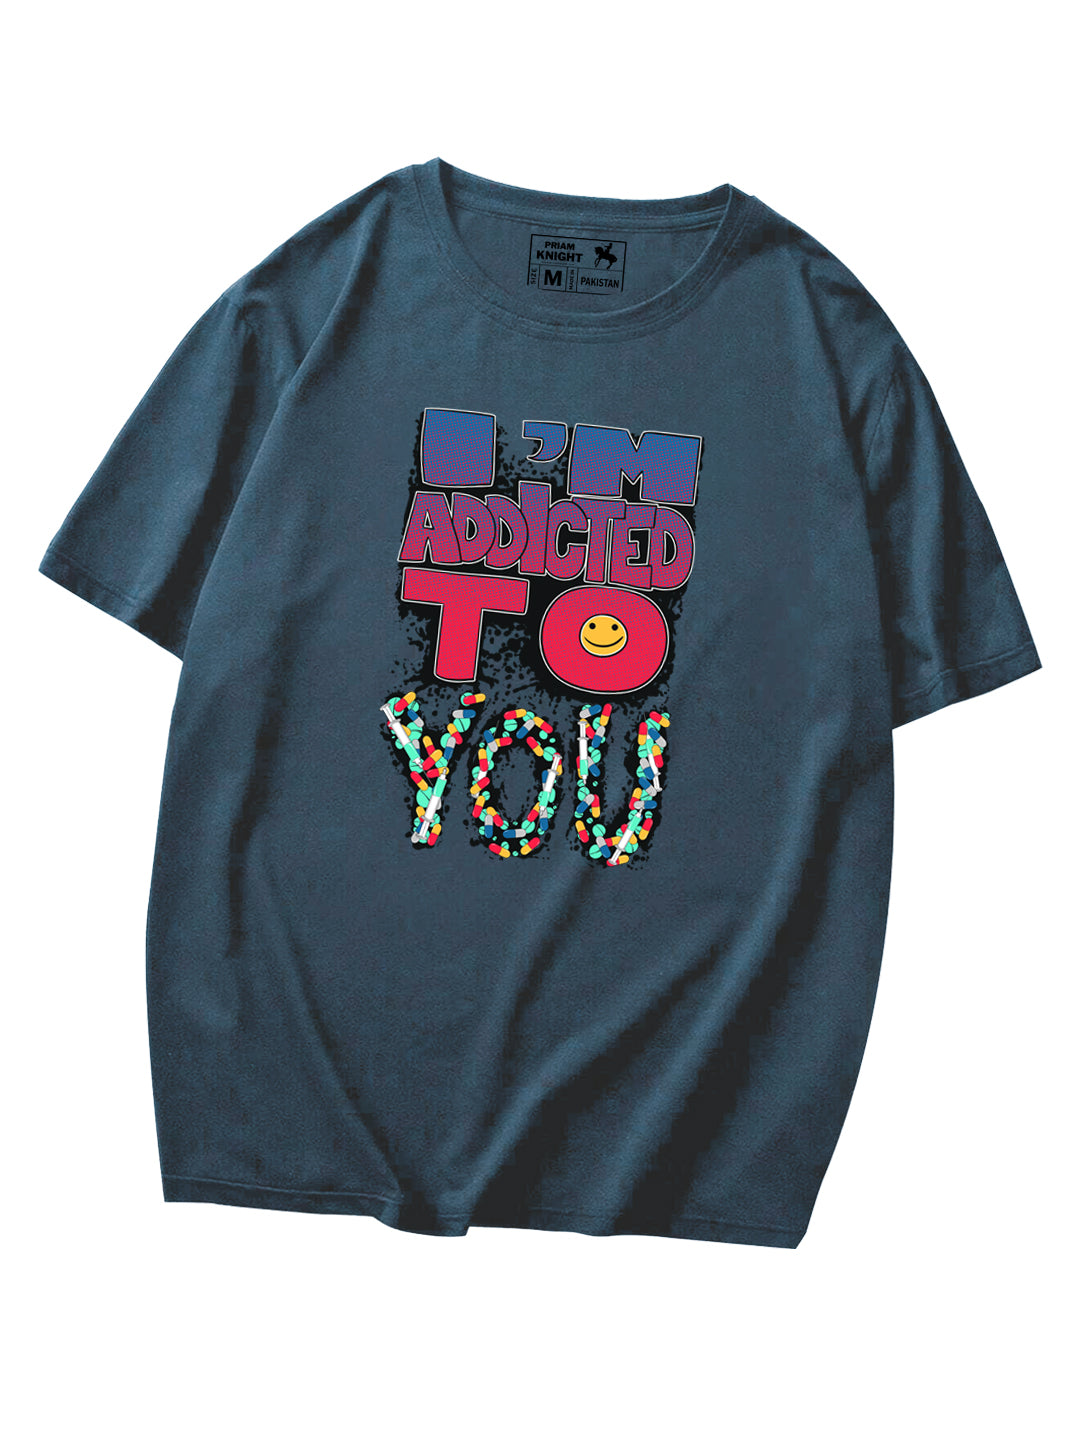 Men's Addicted To You Print Graphic Regular Fit Tees